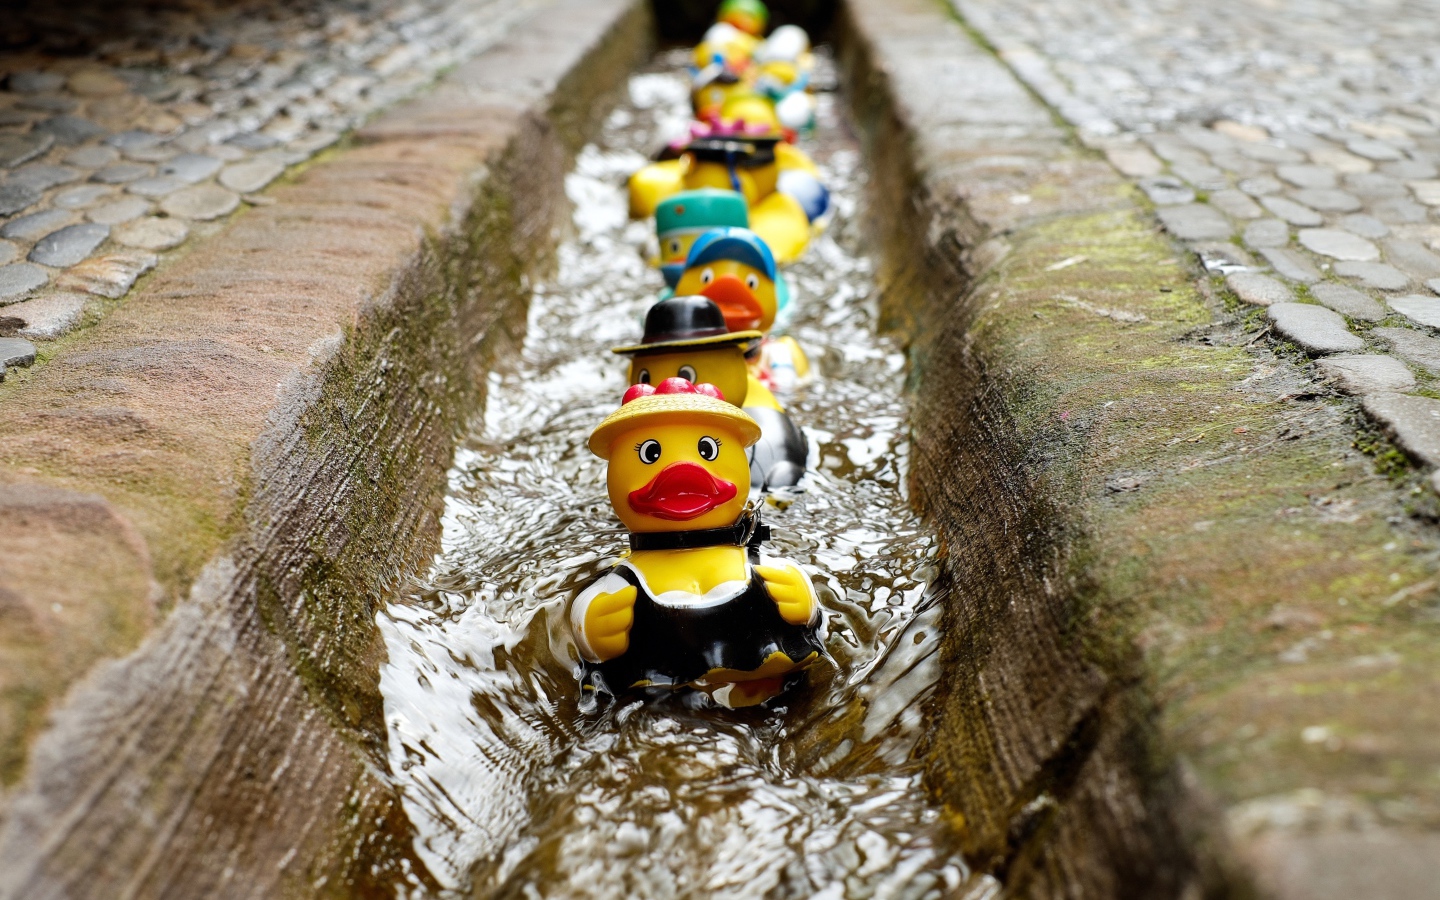 Toys ducklings in the gutter